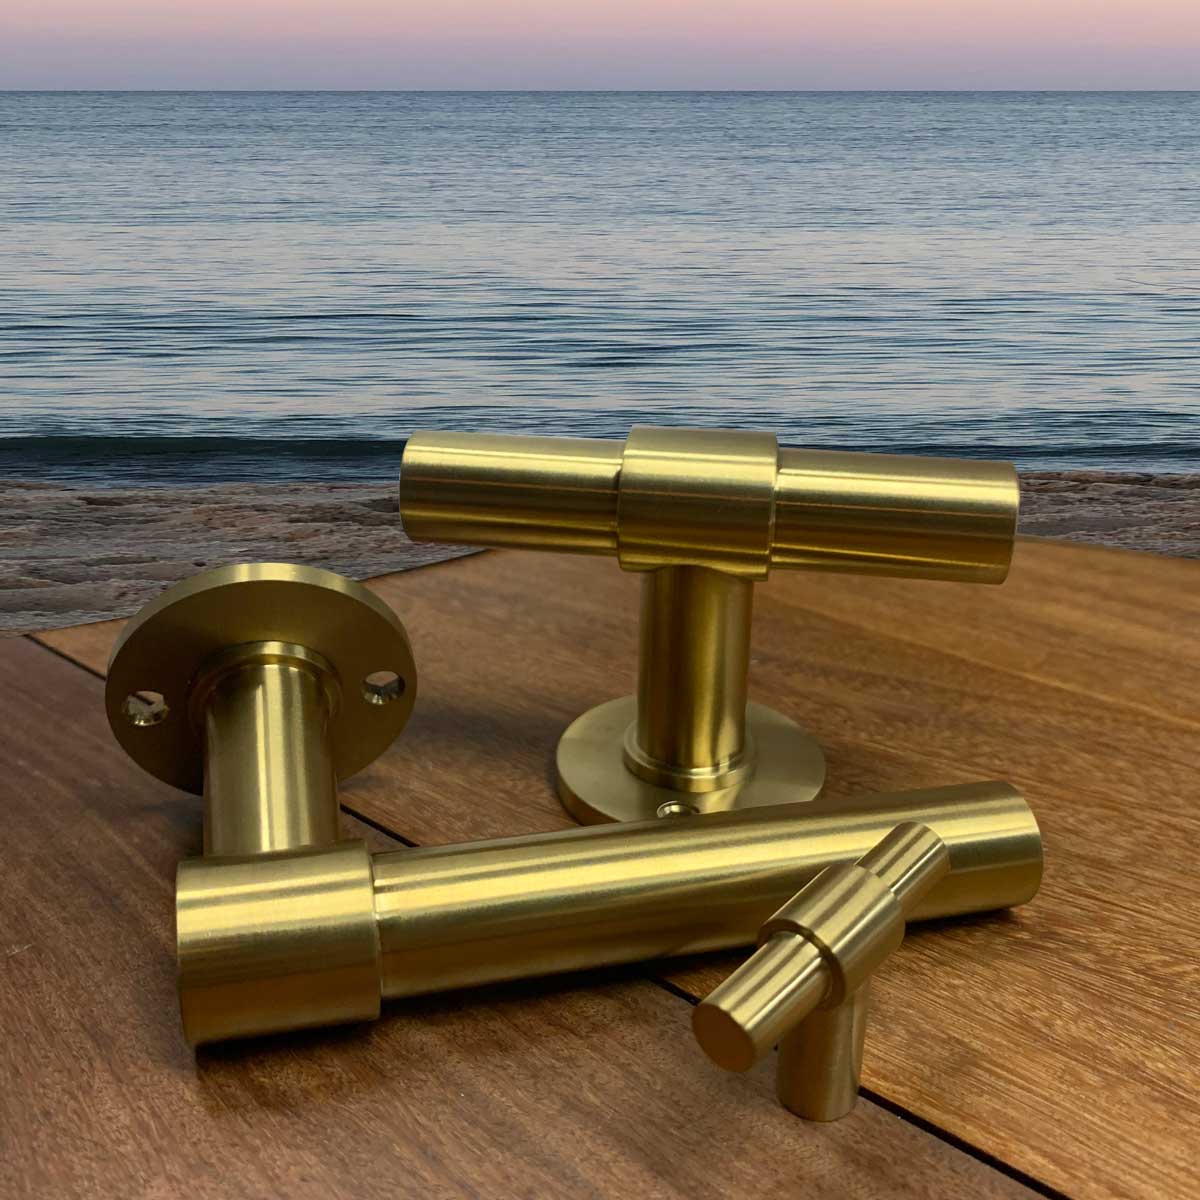 4 Benefits of Specifying PVD Finishes for Architectural Hardware When Building in Coastal Environments